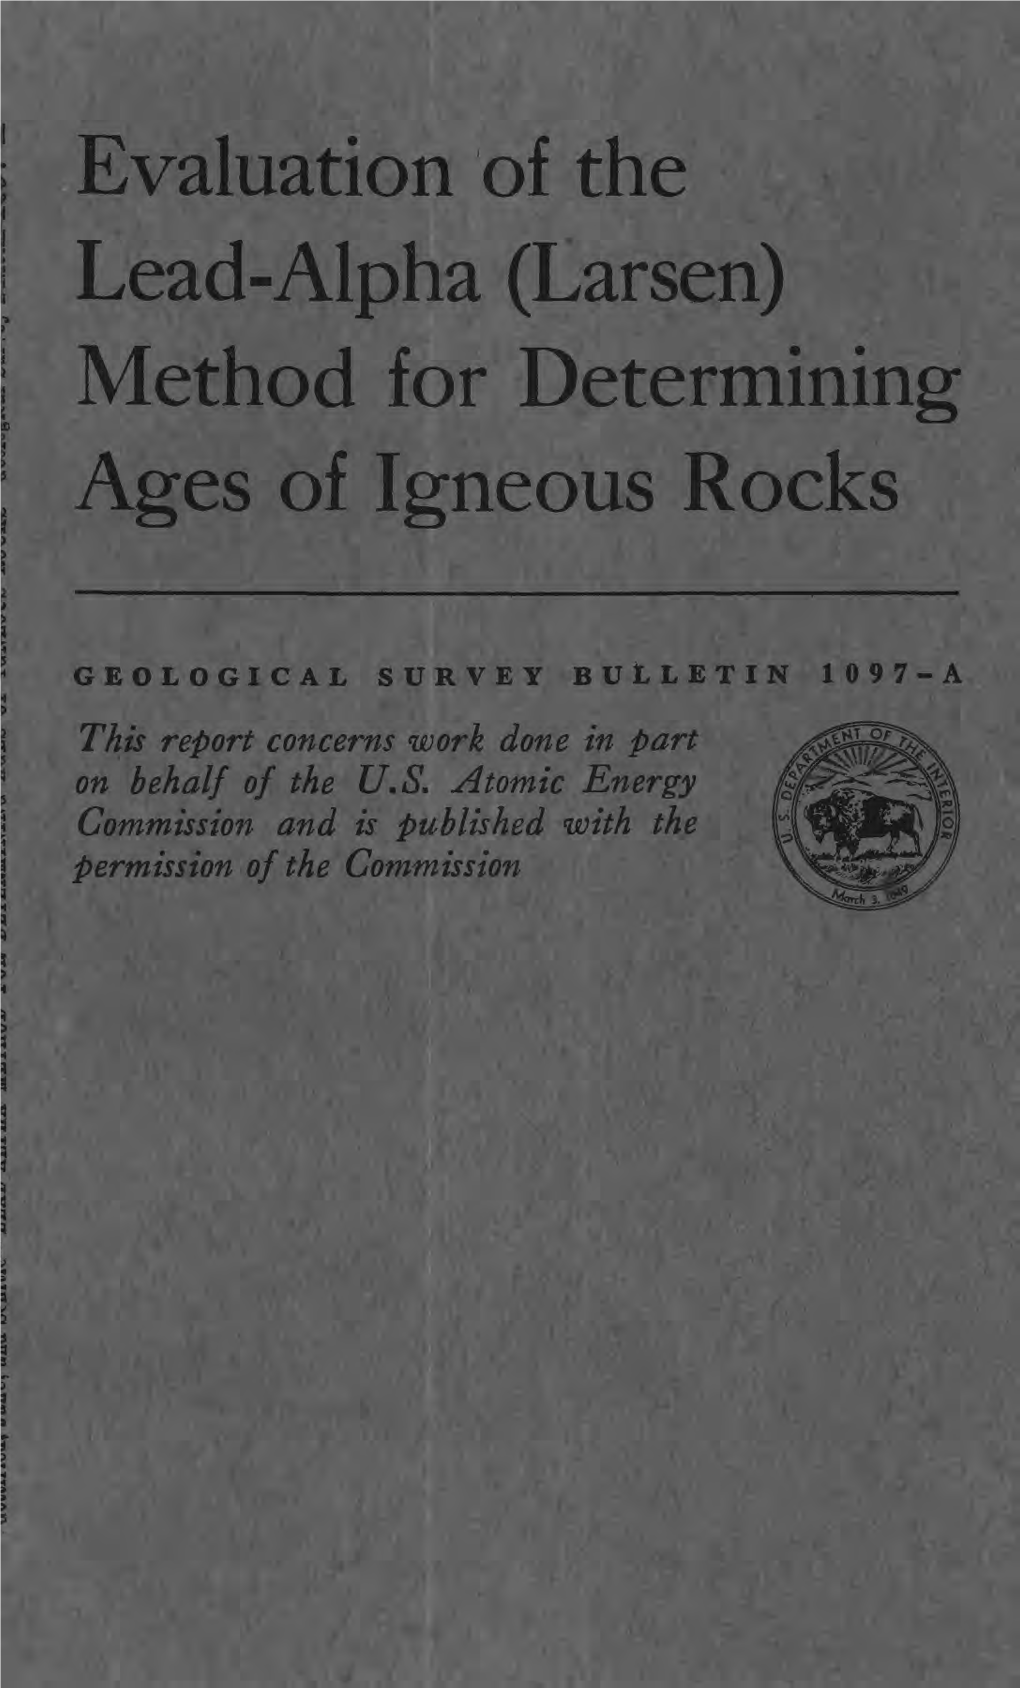 Evaluation of the Lead-Alpha (Larsen) Method for Determining Ages of Igneous Rocks